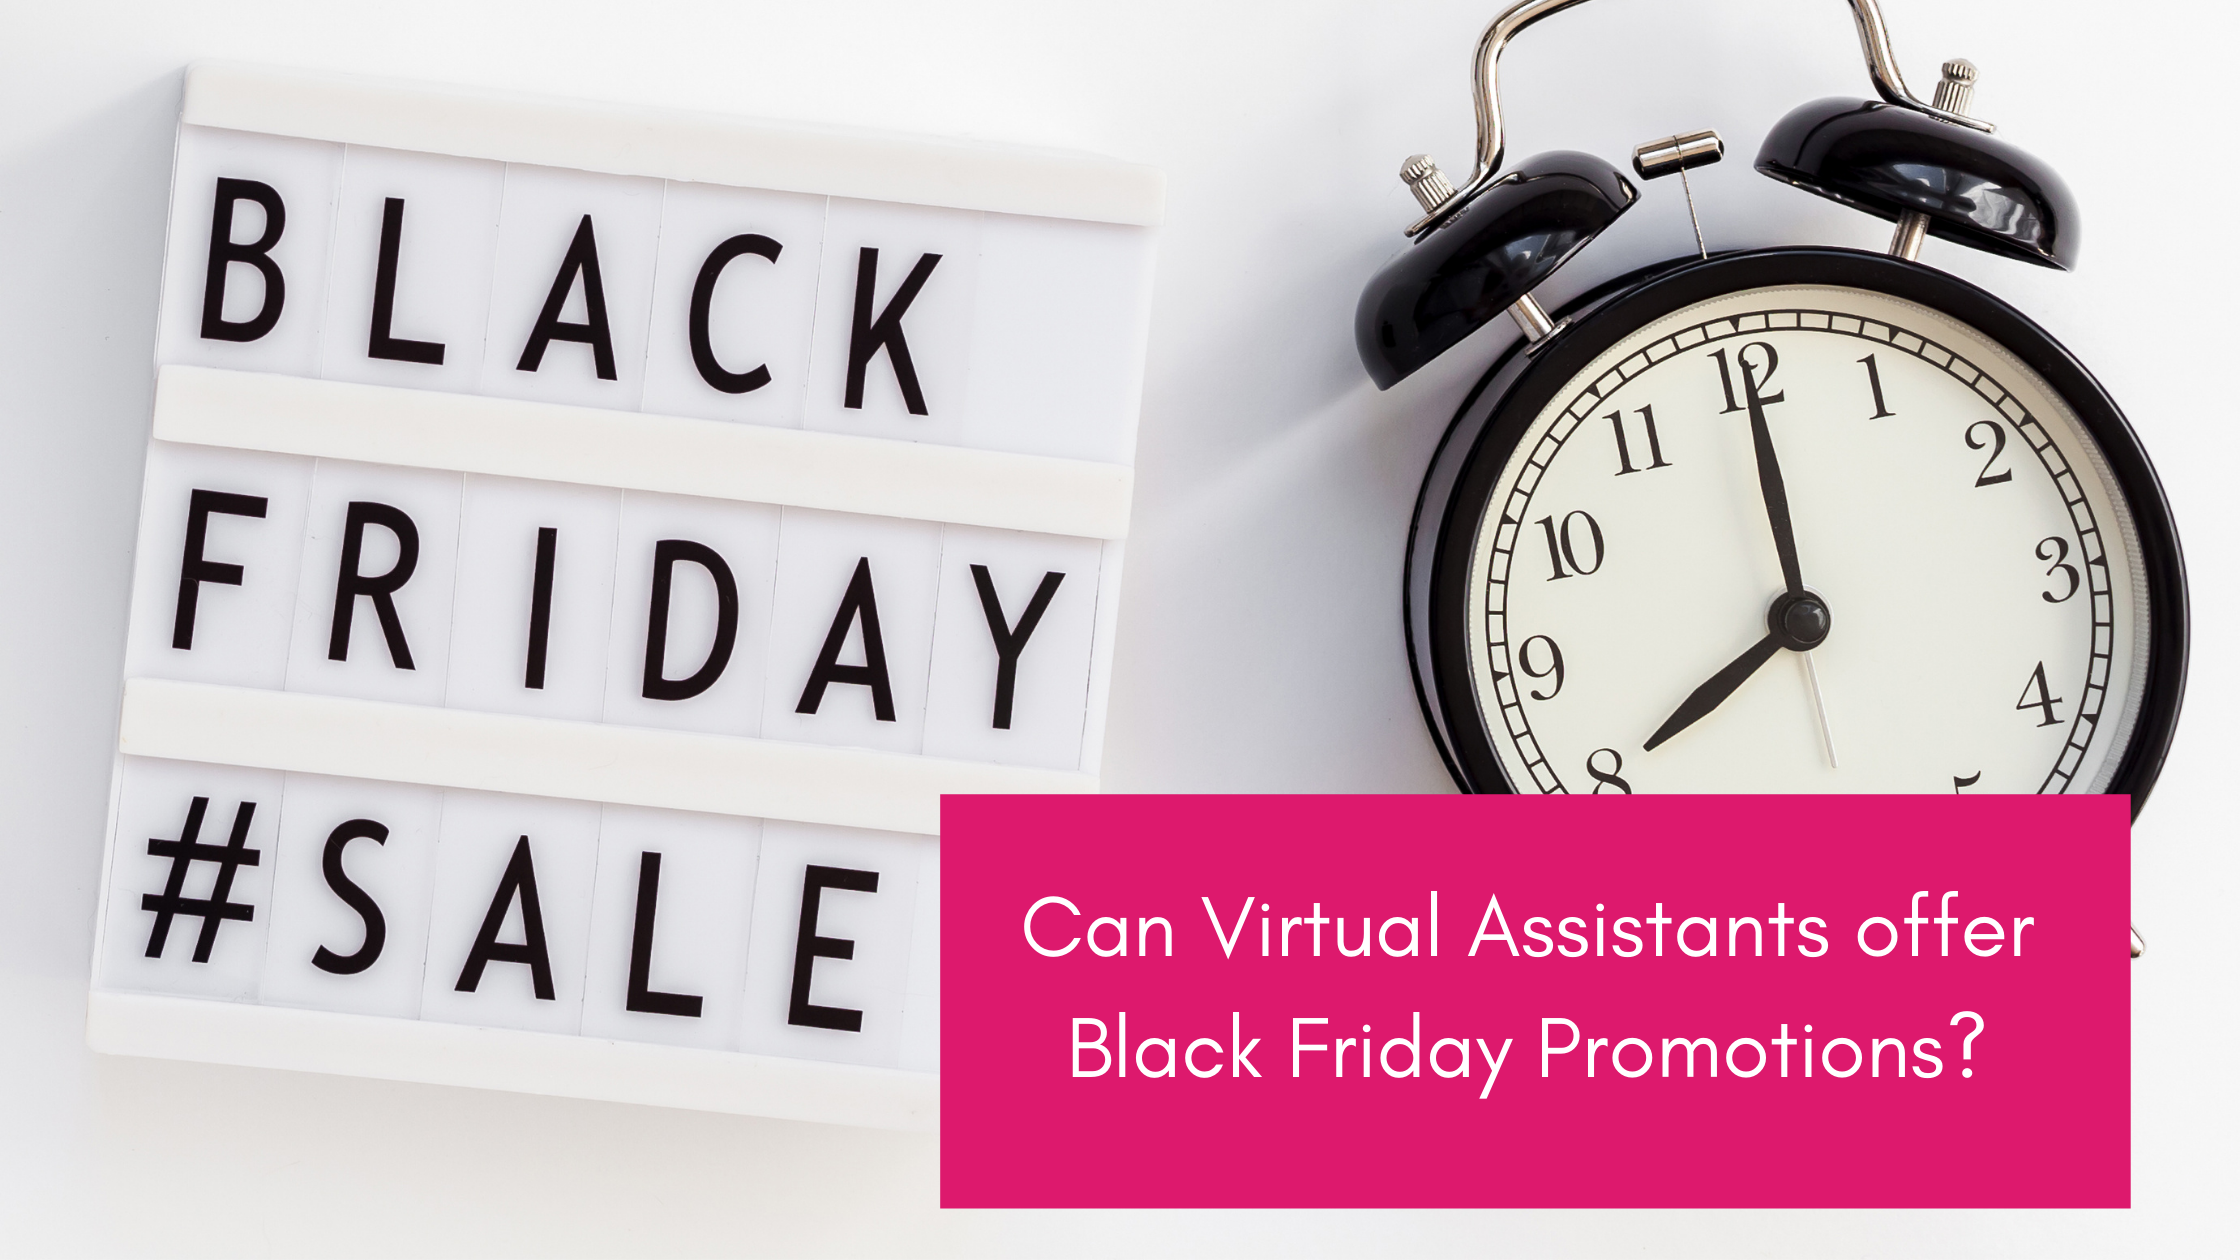 Can Virtual Assistants offer Black Friday Promotions